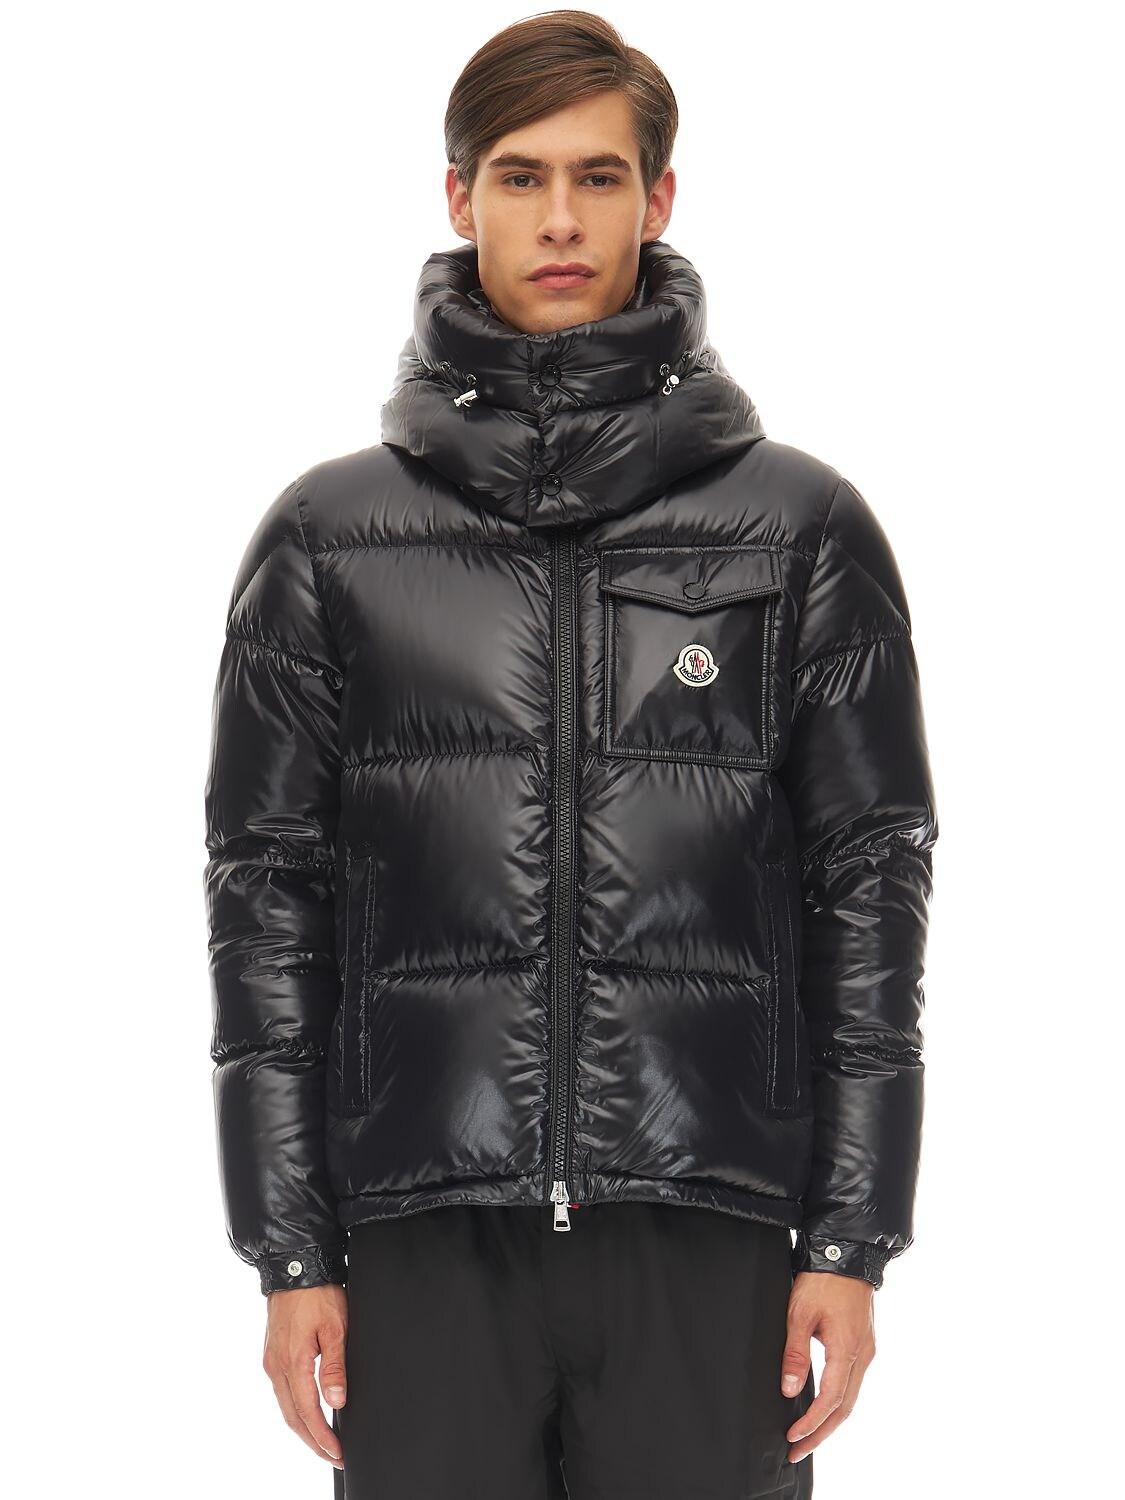 Moncler Synthetic Montbeliard Down Jacket in Black for Men - Lyst